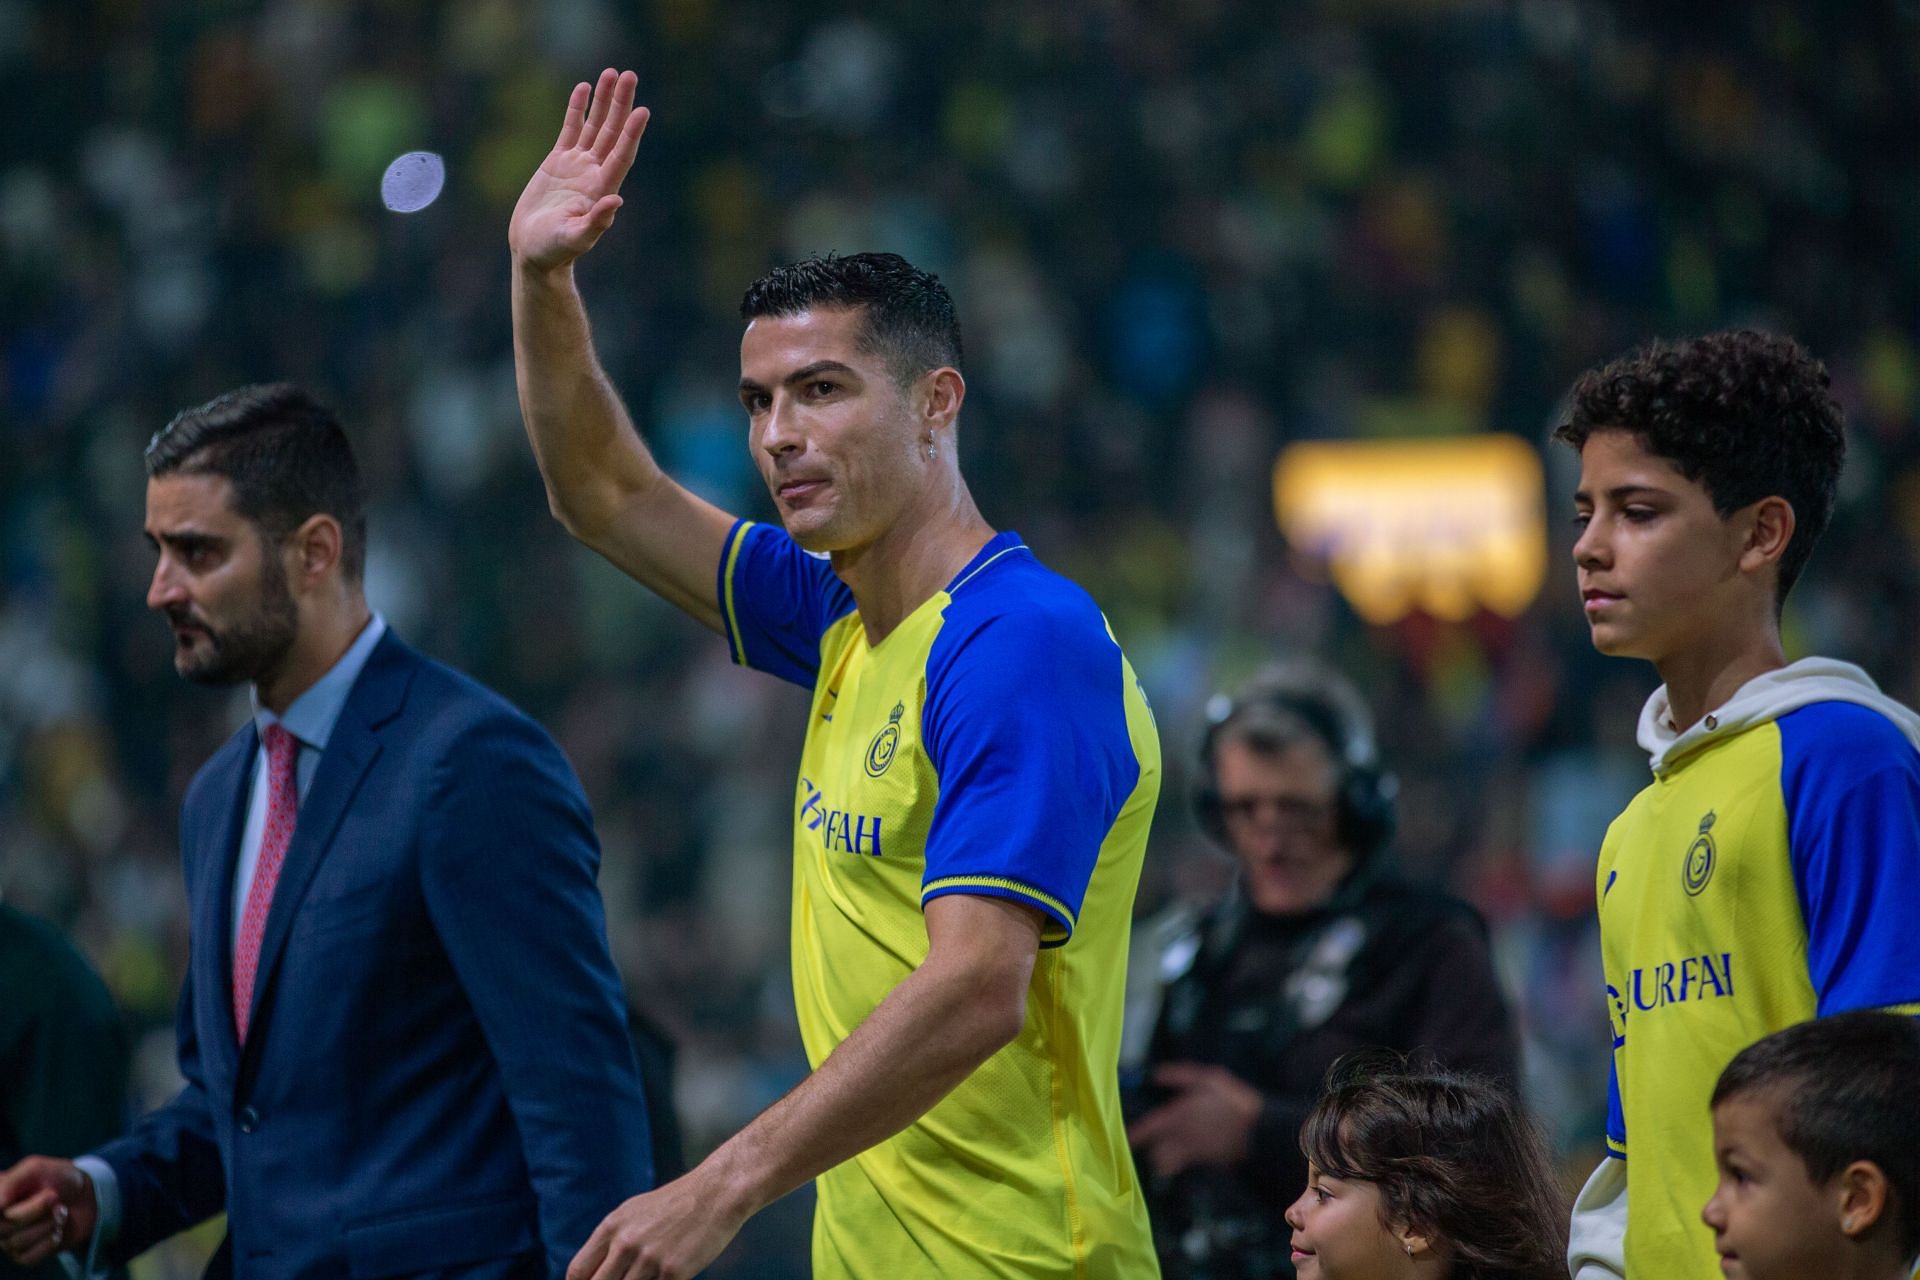 Cristiano Ronaldo is officially unveiled as Al-Nassr player